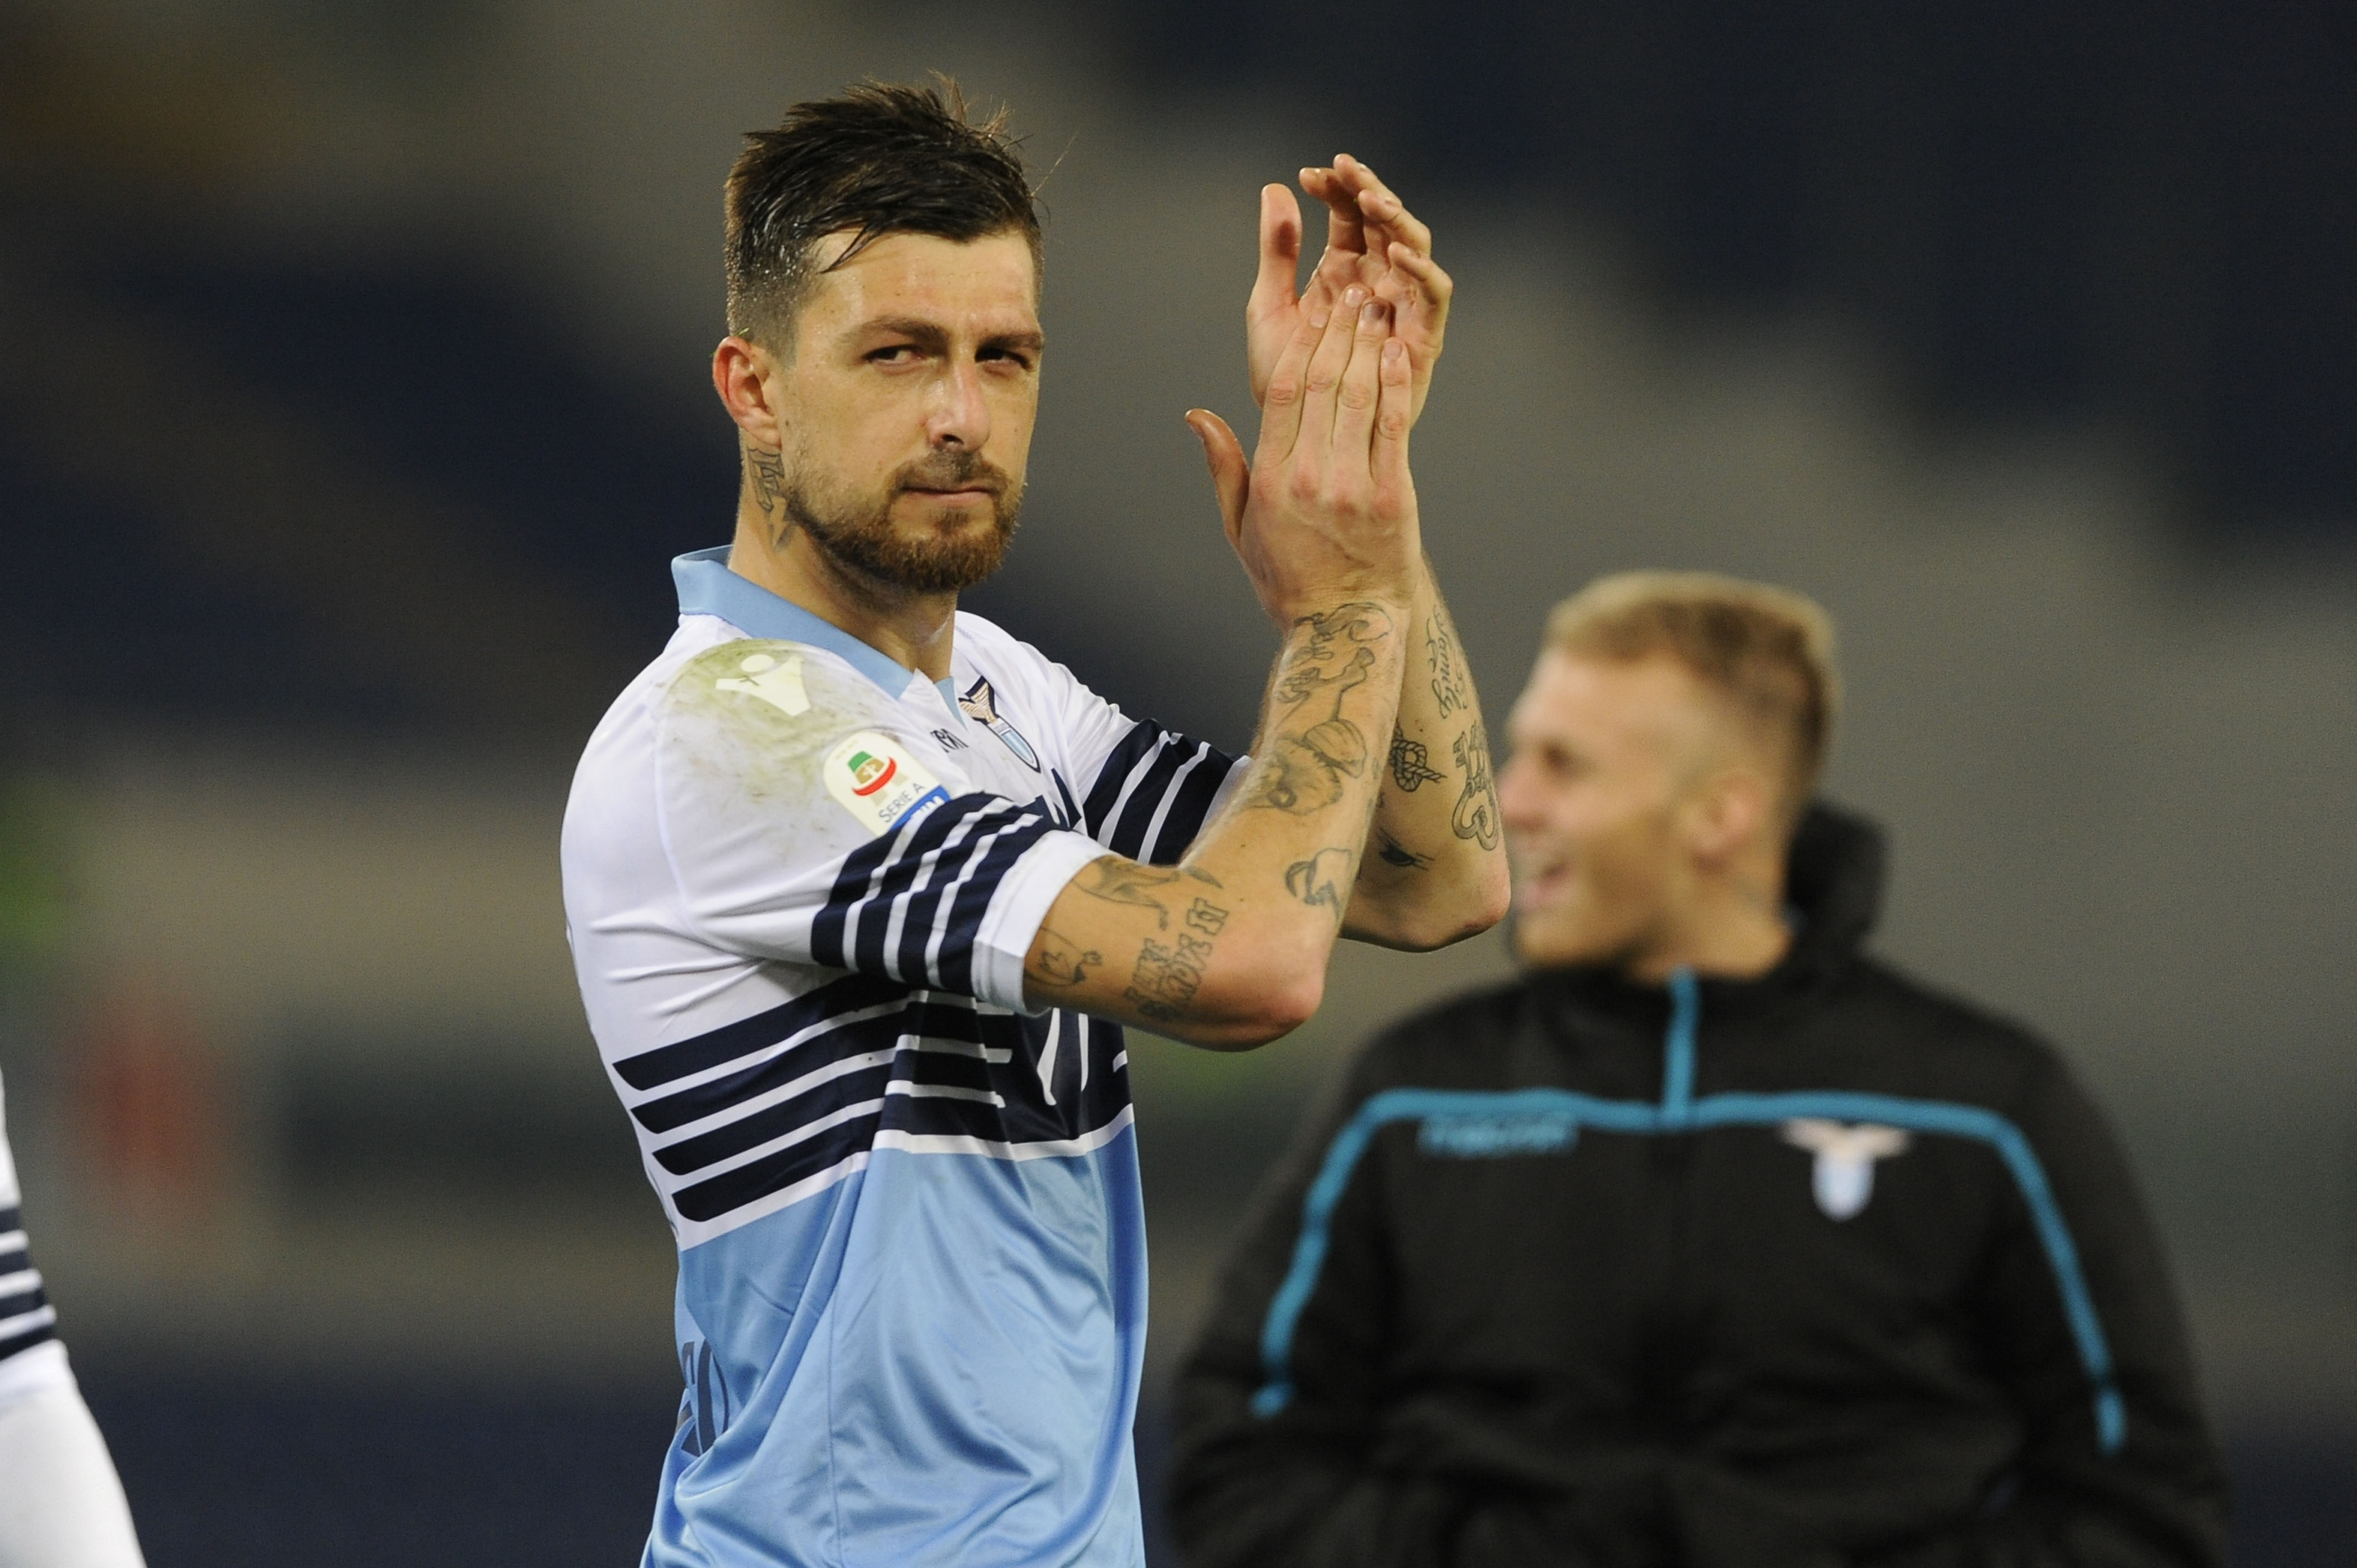 ROME, ITALY - FEBRUARY 07:  Francesco Acerbi of SS lazio celebrates winning the Serie A match between SS Lazio and Empoli at Stadio Olimpico on February 7, 2019 in Rome, Italy.  (Photo by Marco Rosi/Getty Images)